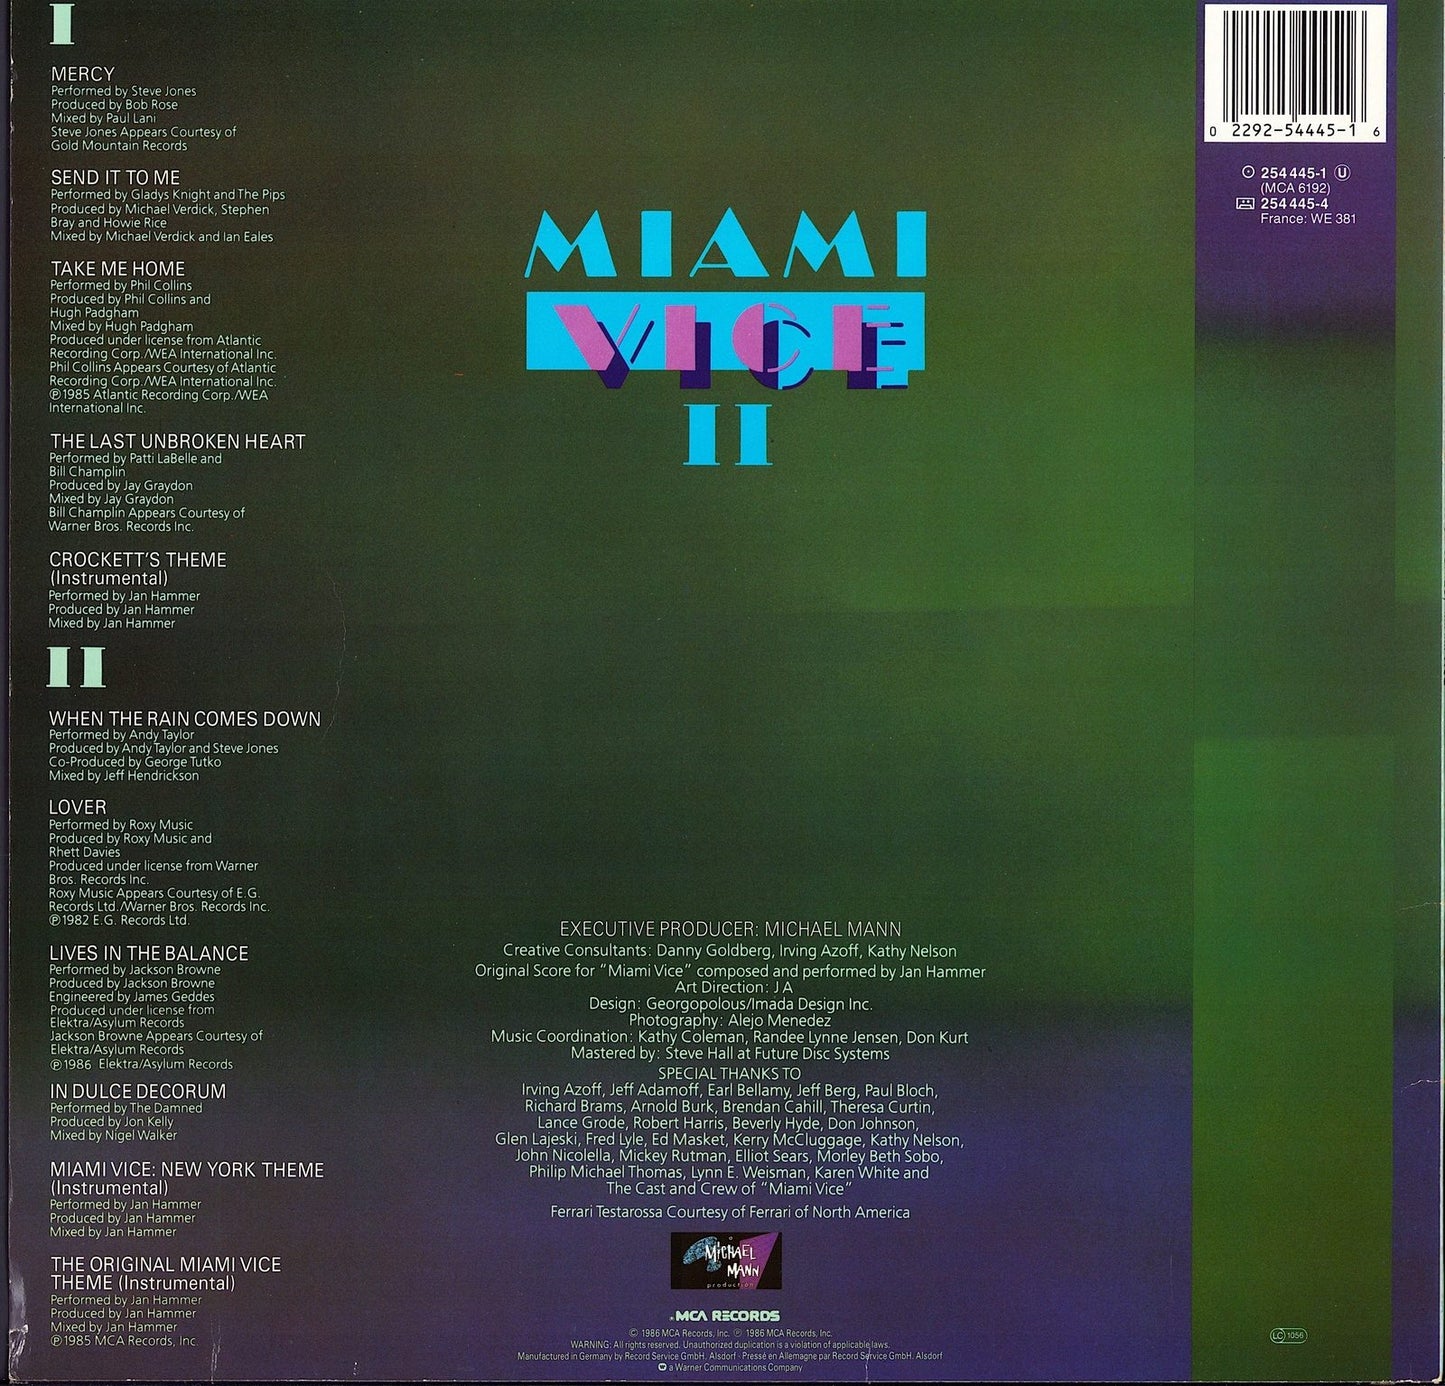 Miami Vice II New Music From The Television Series, "Miami Vice" Starring Don Johnson And Philip Michael Thomas Vinyl LP